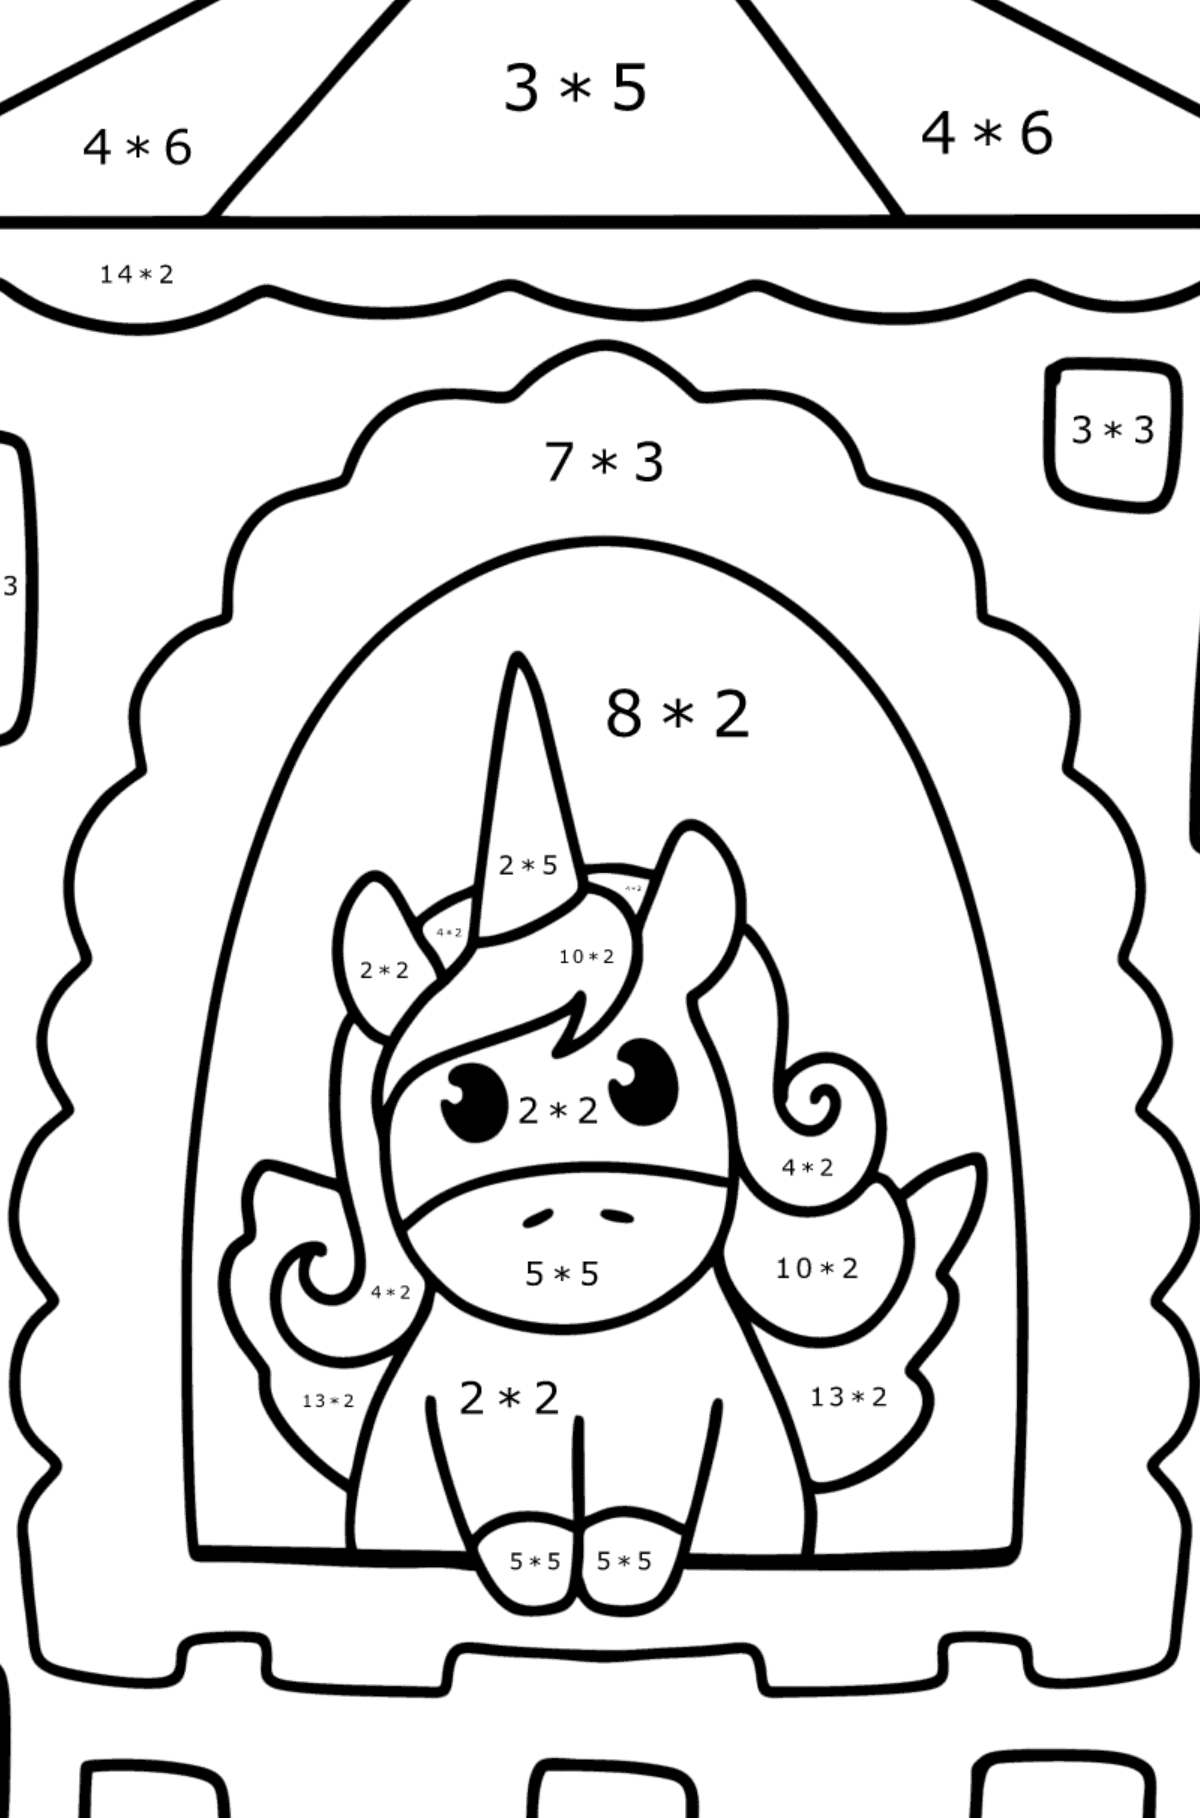 Unicorn in fairyland coloring page - Math Coloring - Multiplication for Kids